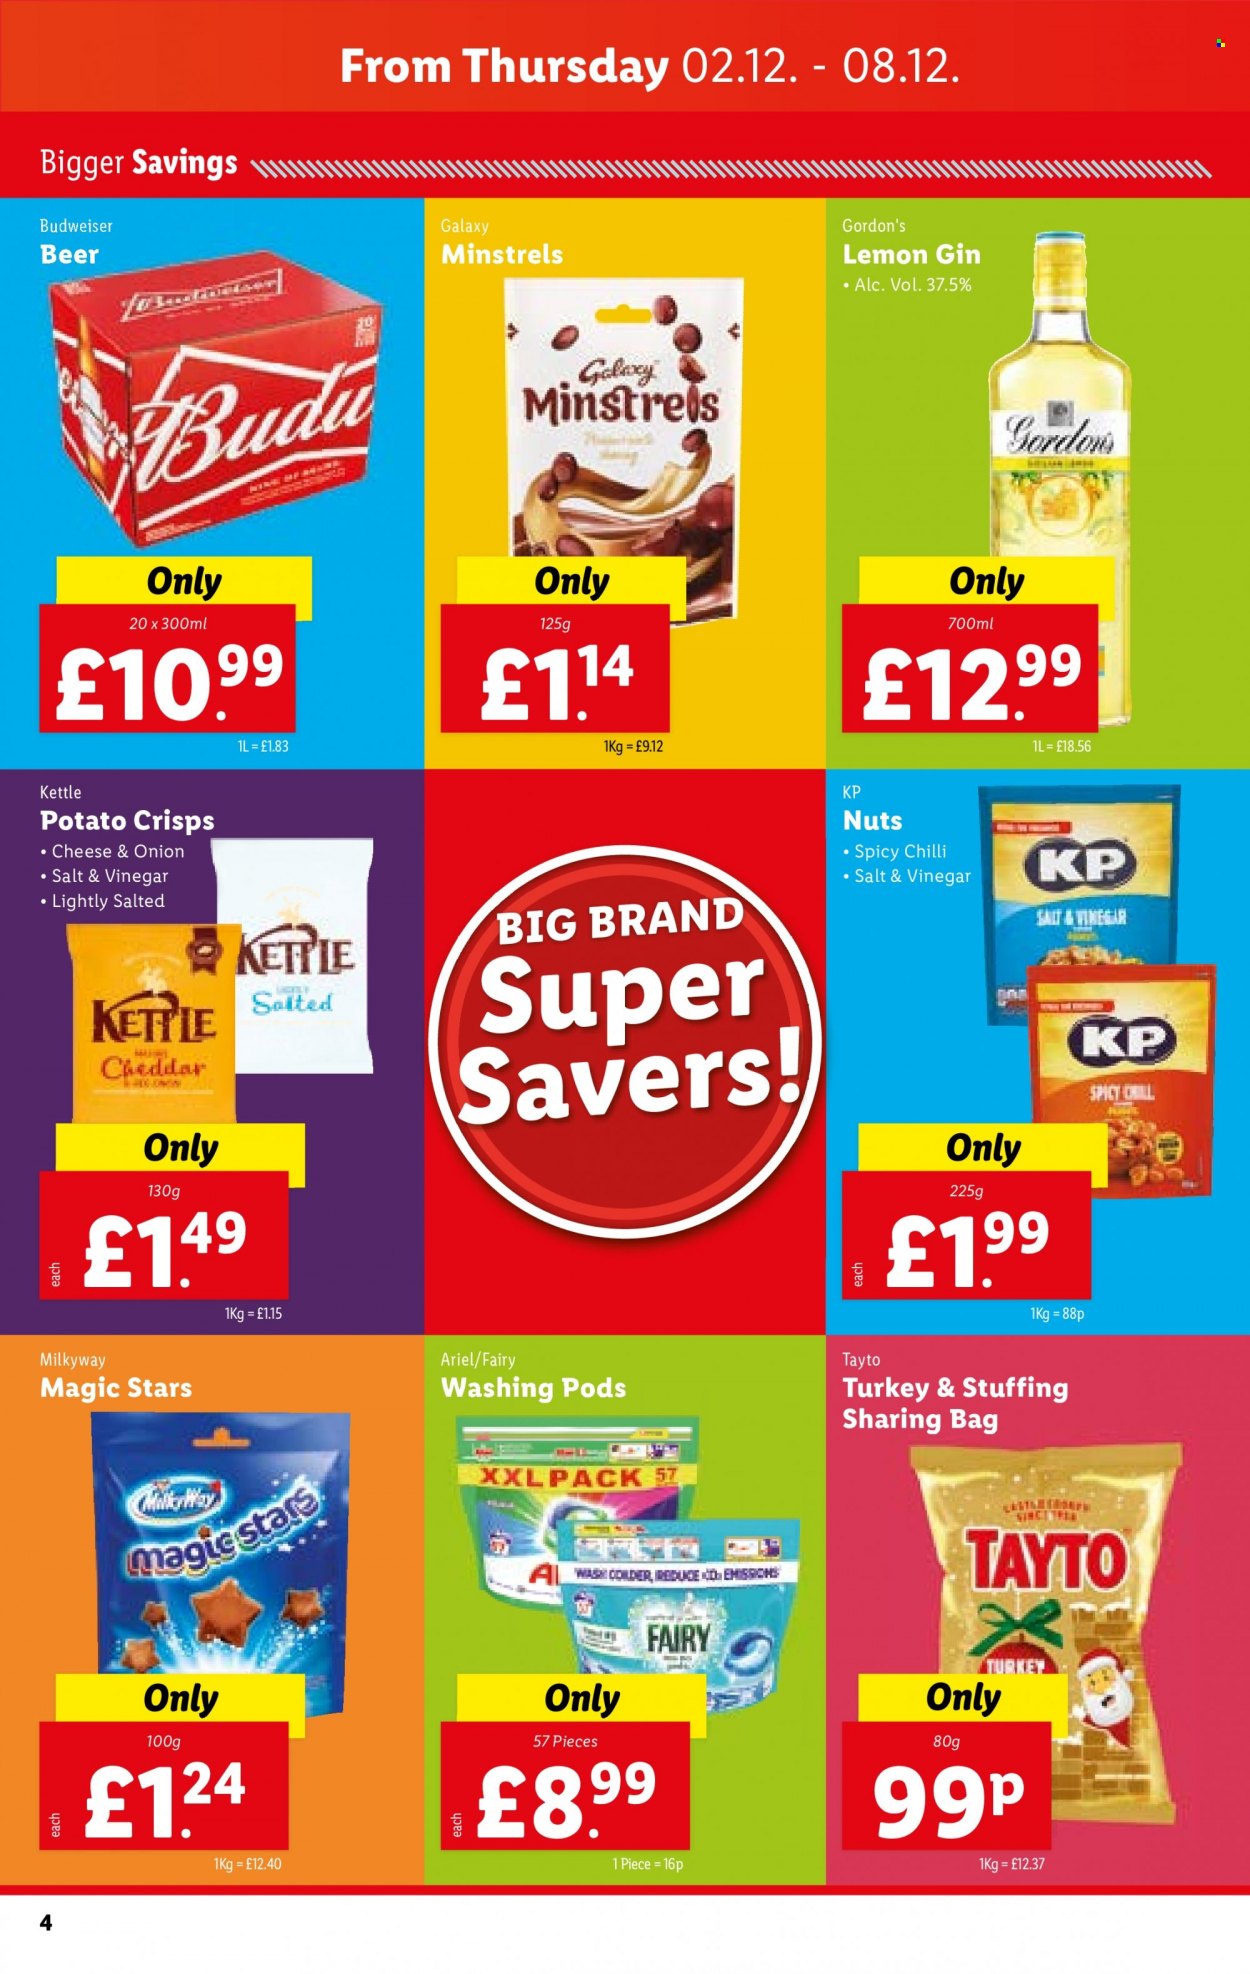 thumbnail - Lidl offer  - 02/12/2021 - 08/12/2021 - Sales products - Budweiser, beer, cheddar, potato crisps, kettle, Tayto, vinegar, gin, Gordon's, Fairy, Ariel. Page 4.